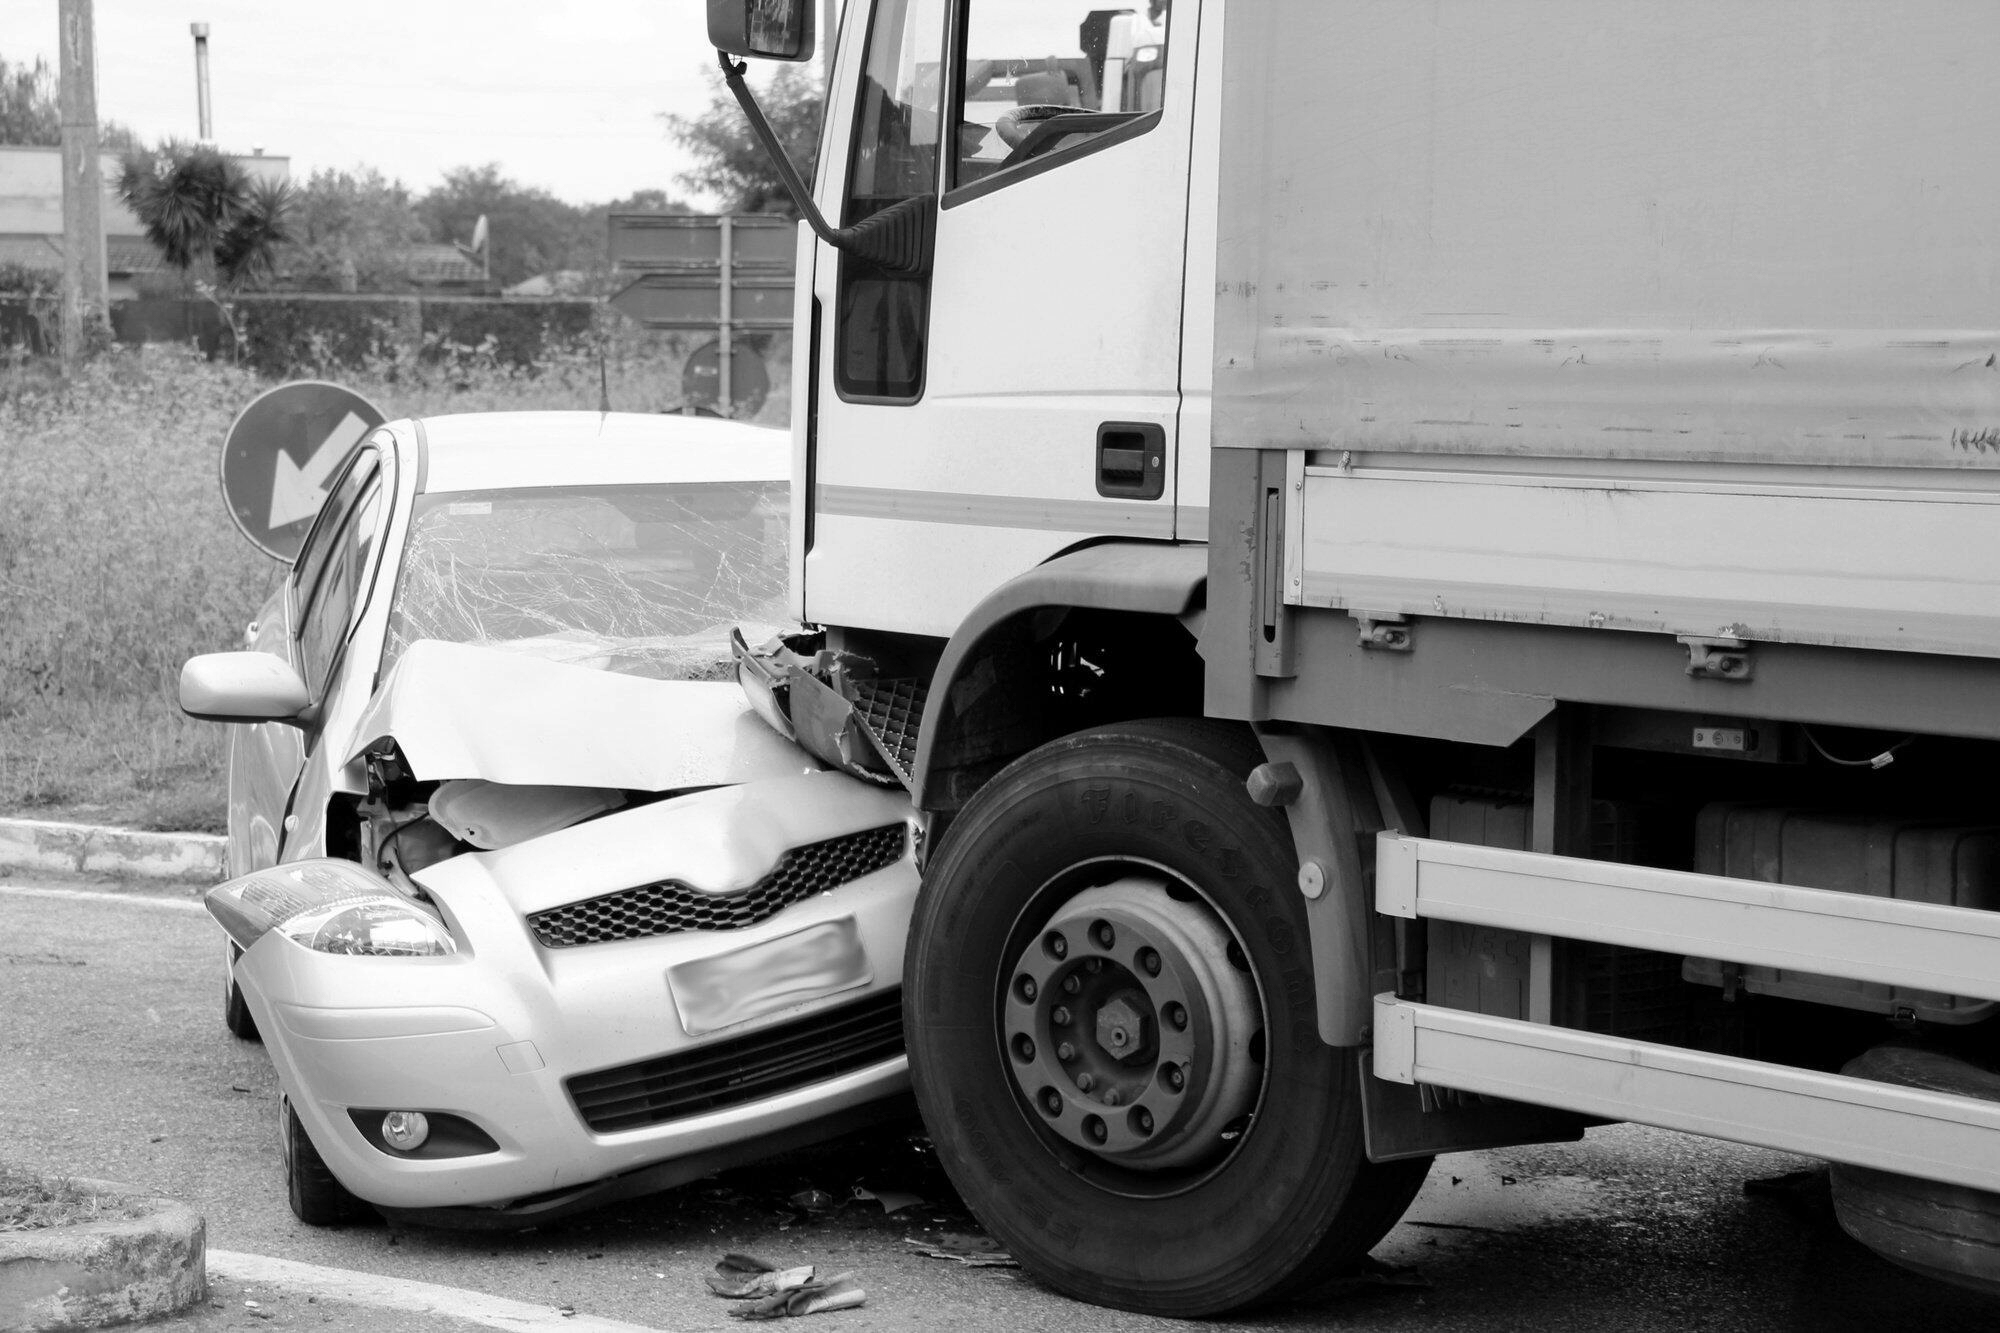 Scene of an accident between a sedan and a semi-truck.